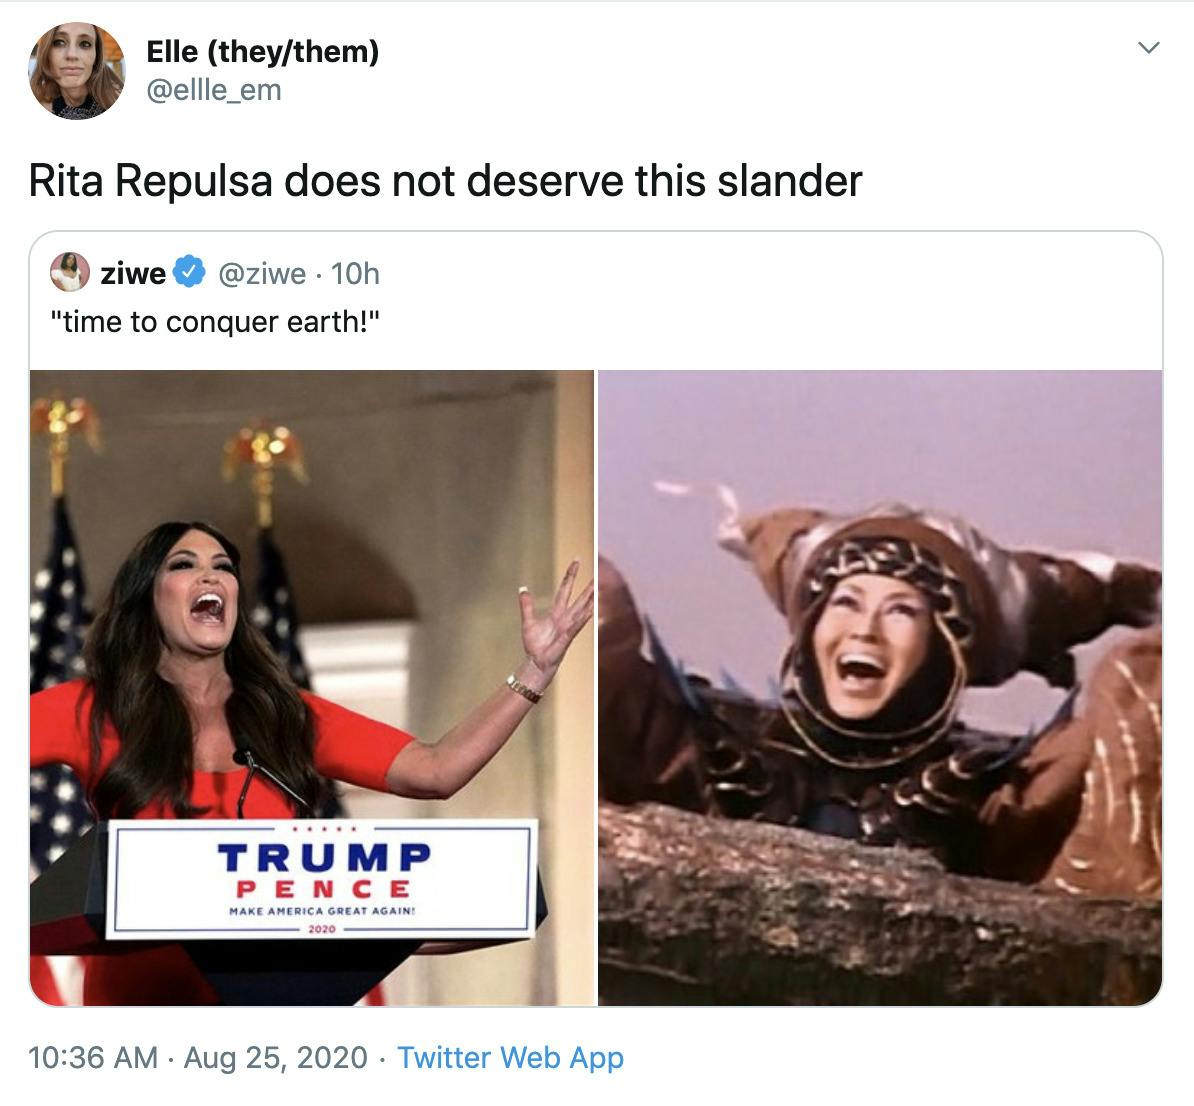 "Rita Repulsa does not deserve this slander" quote retweet of @ziwe "time to conquer earth!" over image of Guilfoyle next to Rita Repulsa